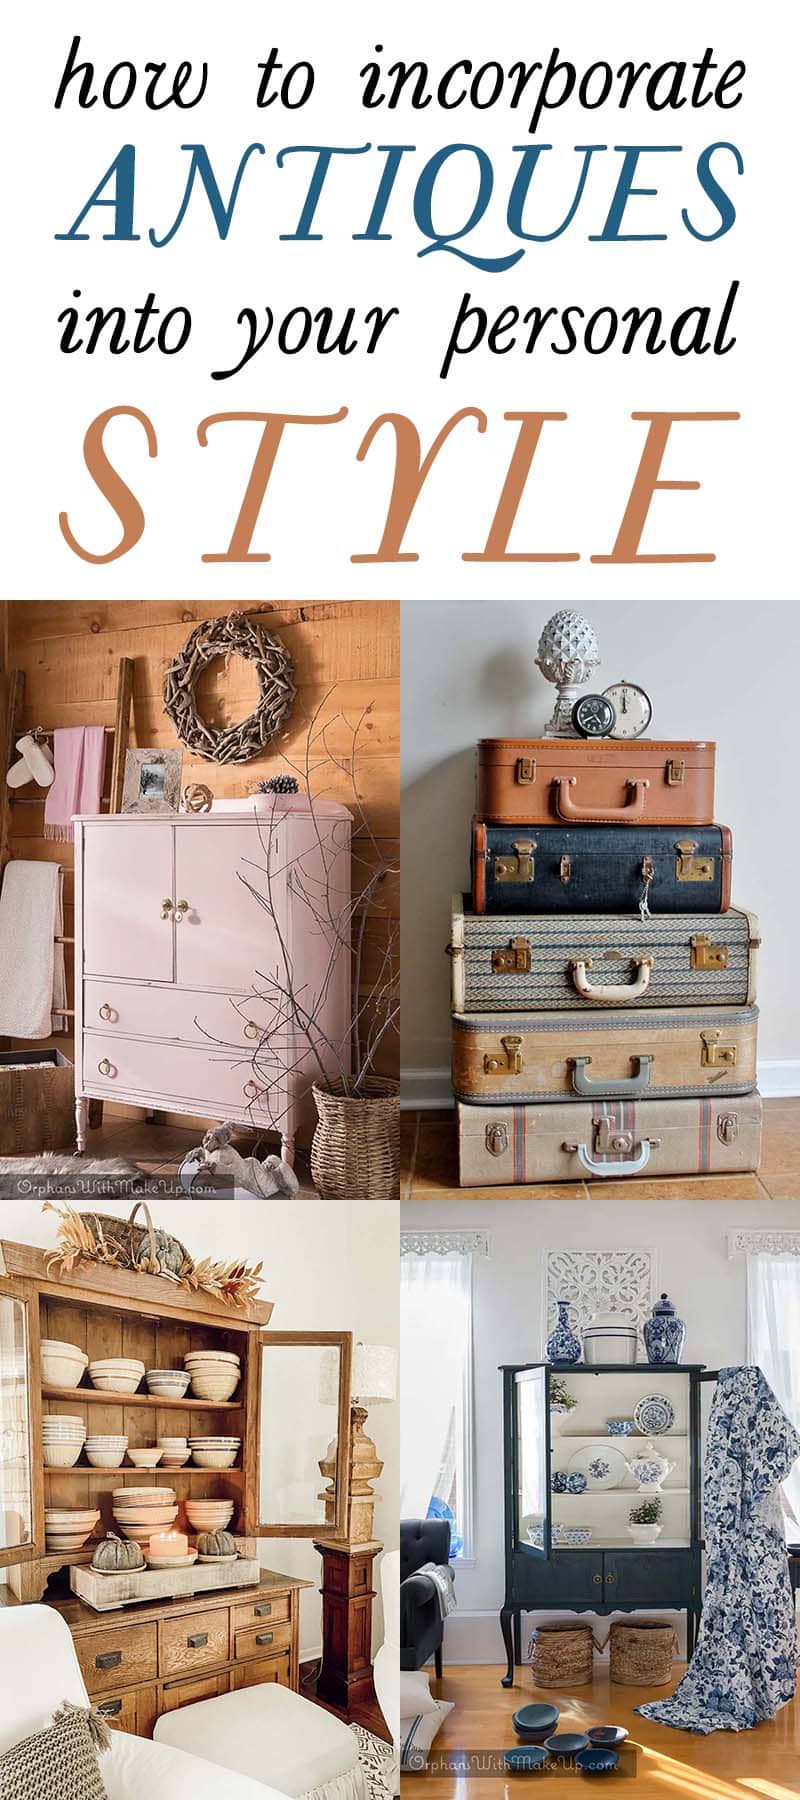 Need some tips on how to incorporate antiques into your personal style? Sue hope these give you some inspiration.